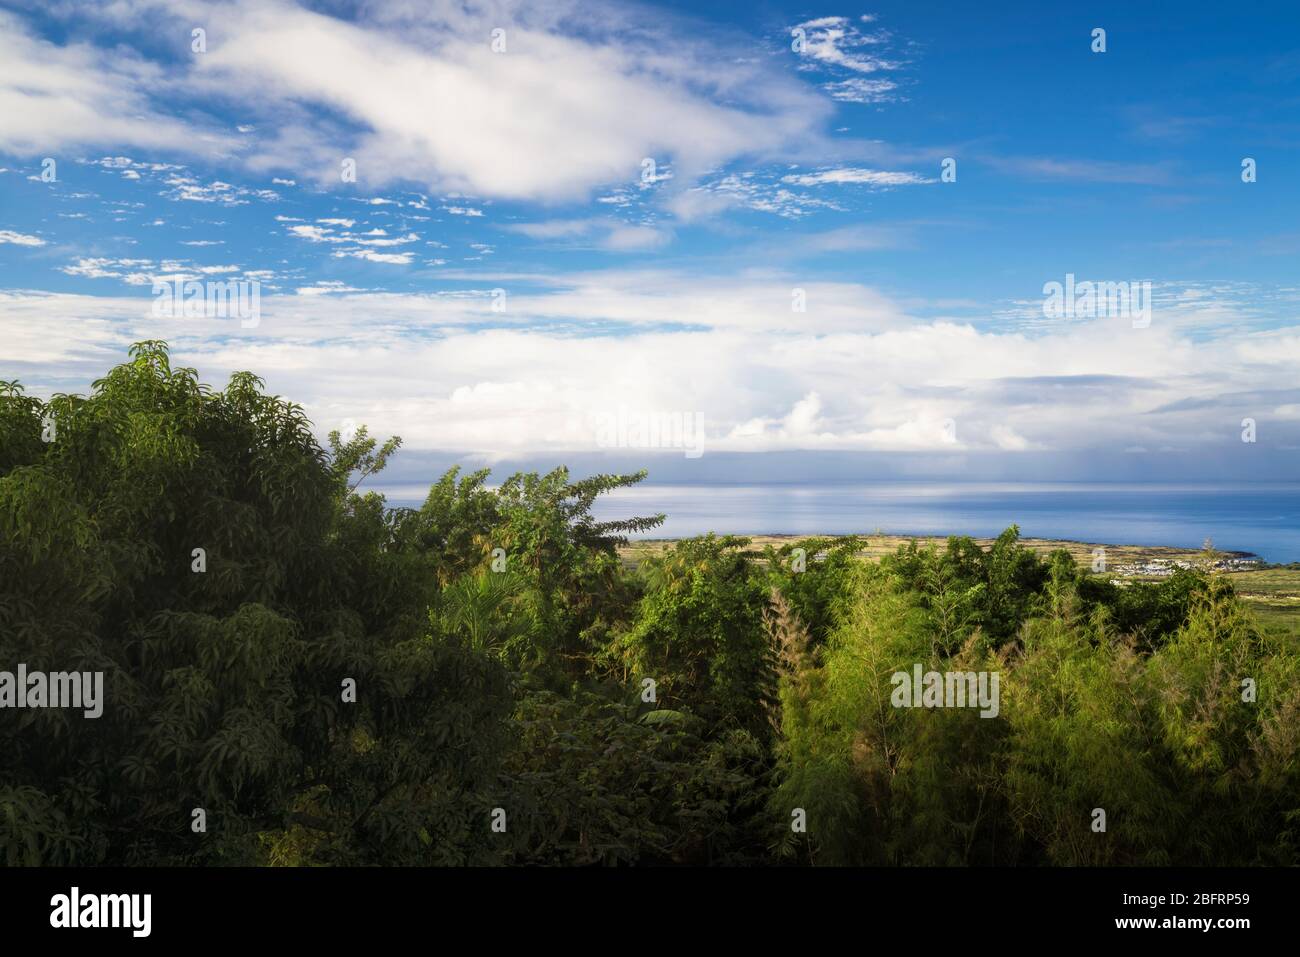 This stunning view of the Pacific Ocean and Honokohau Harbor below from atop the Kona Highlands on the Big Island of Hawaii. Stock Photo